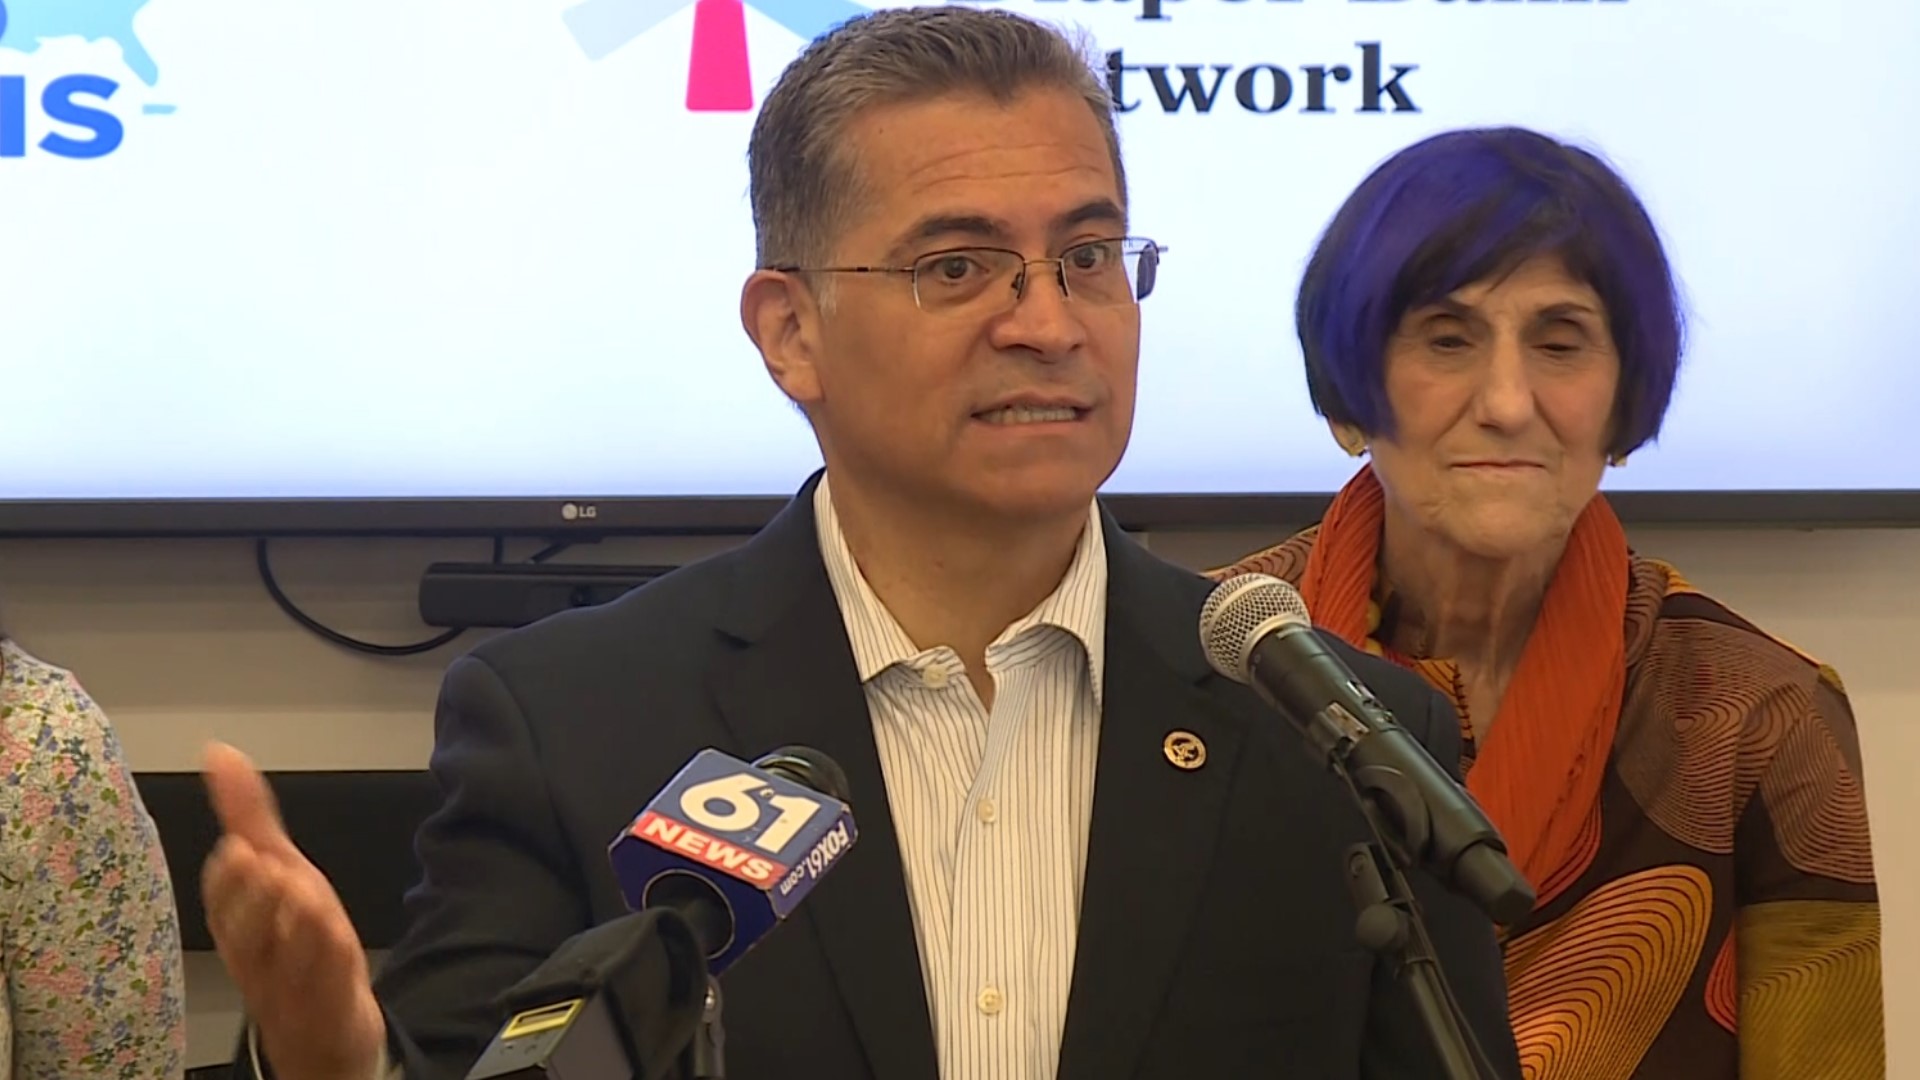 Secretary Xavier Becerra visited New Haven to spread the message for a national "We Can Do This" campaign.